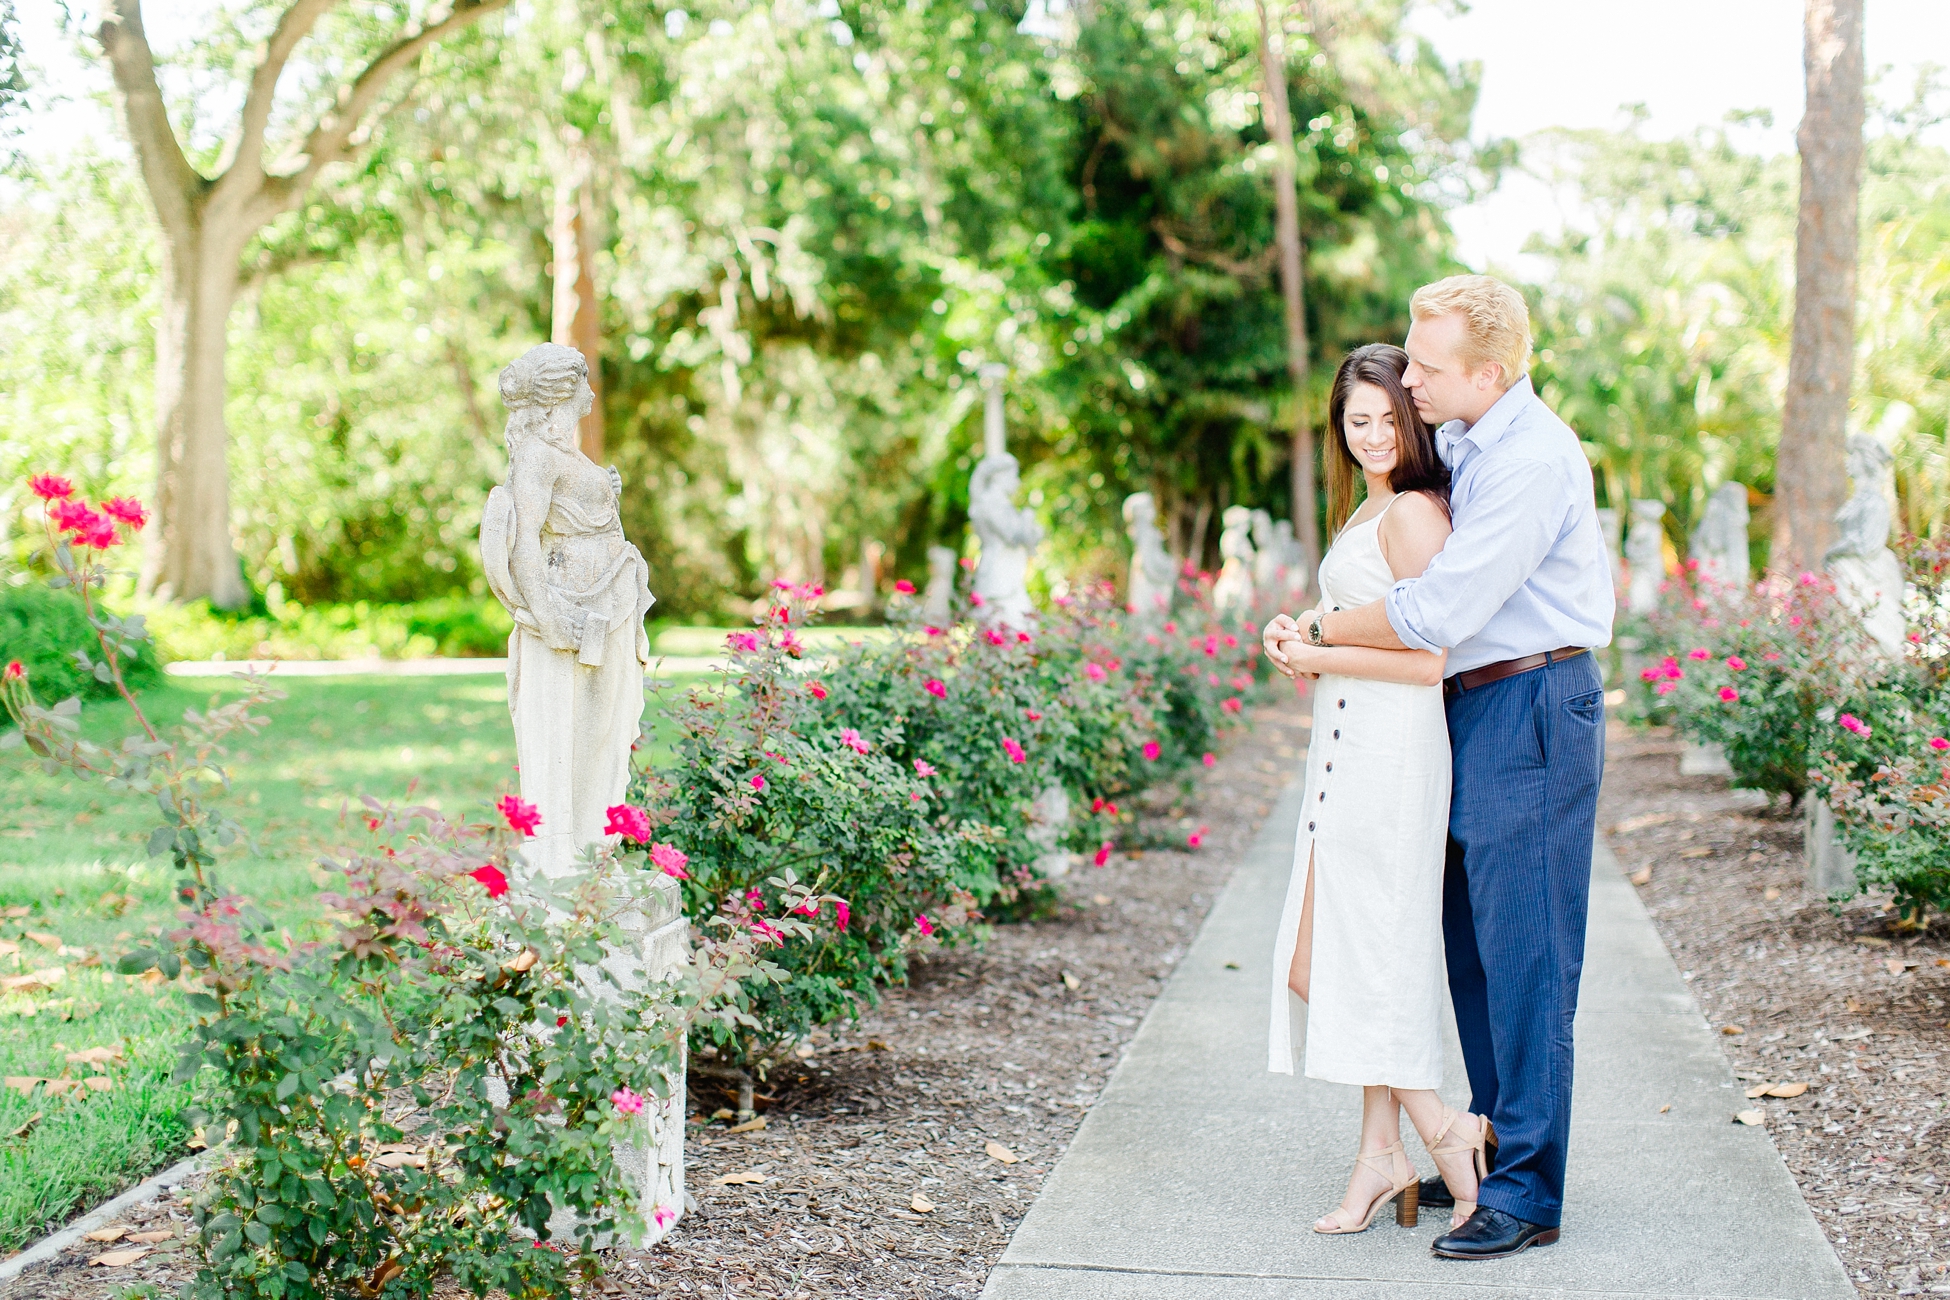 Ringling Museum Engagement | © Ailyn La Torre Photography 2018